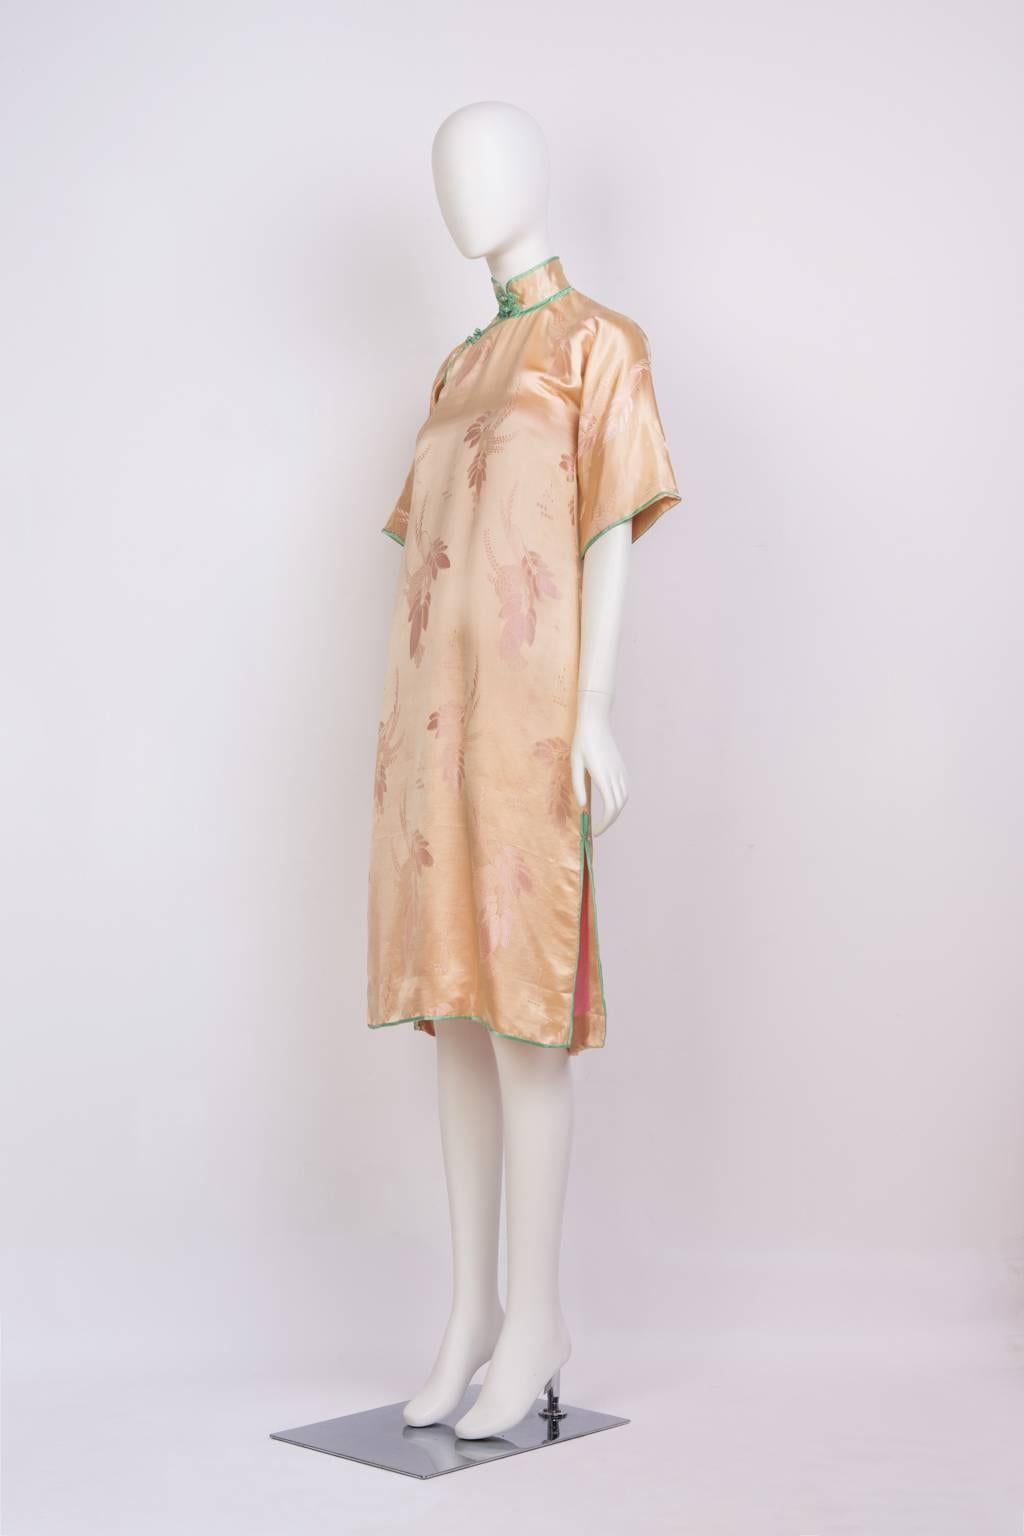 Short sleeve, knee-length cheongsam with side slits and frog closures in peach silk floral jacquard with green trim.